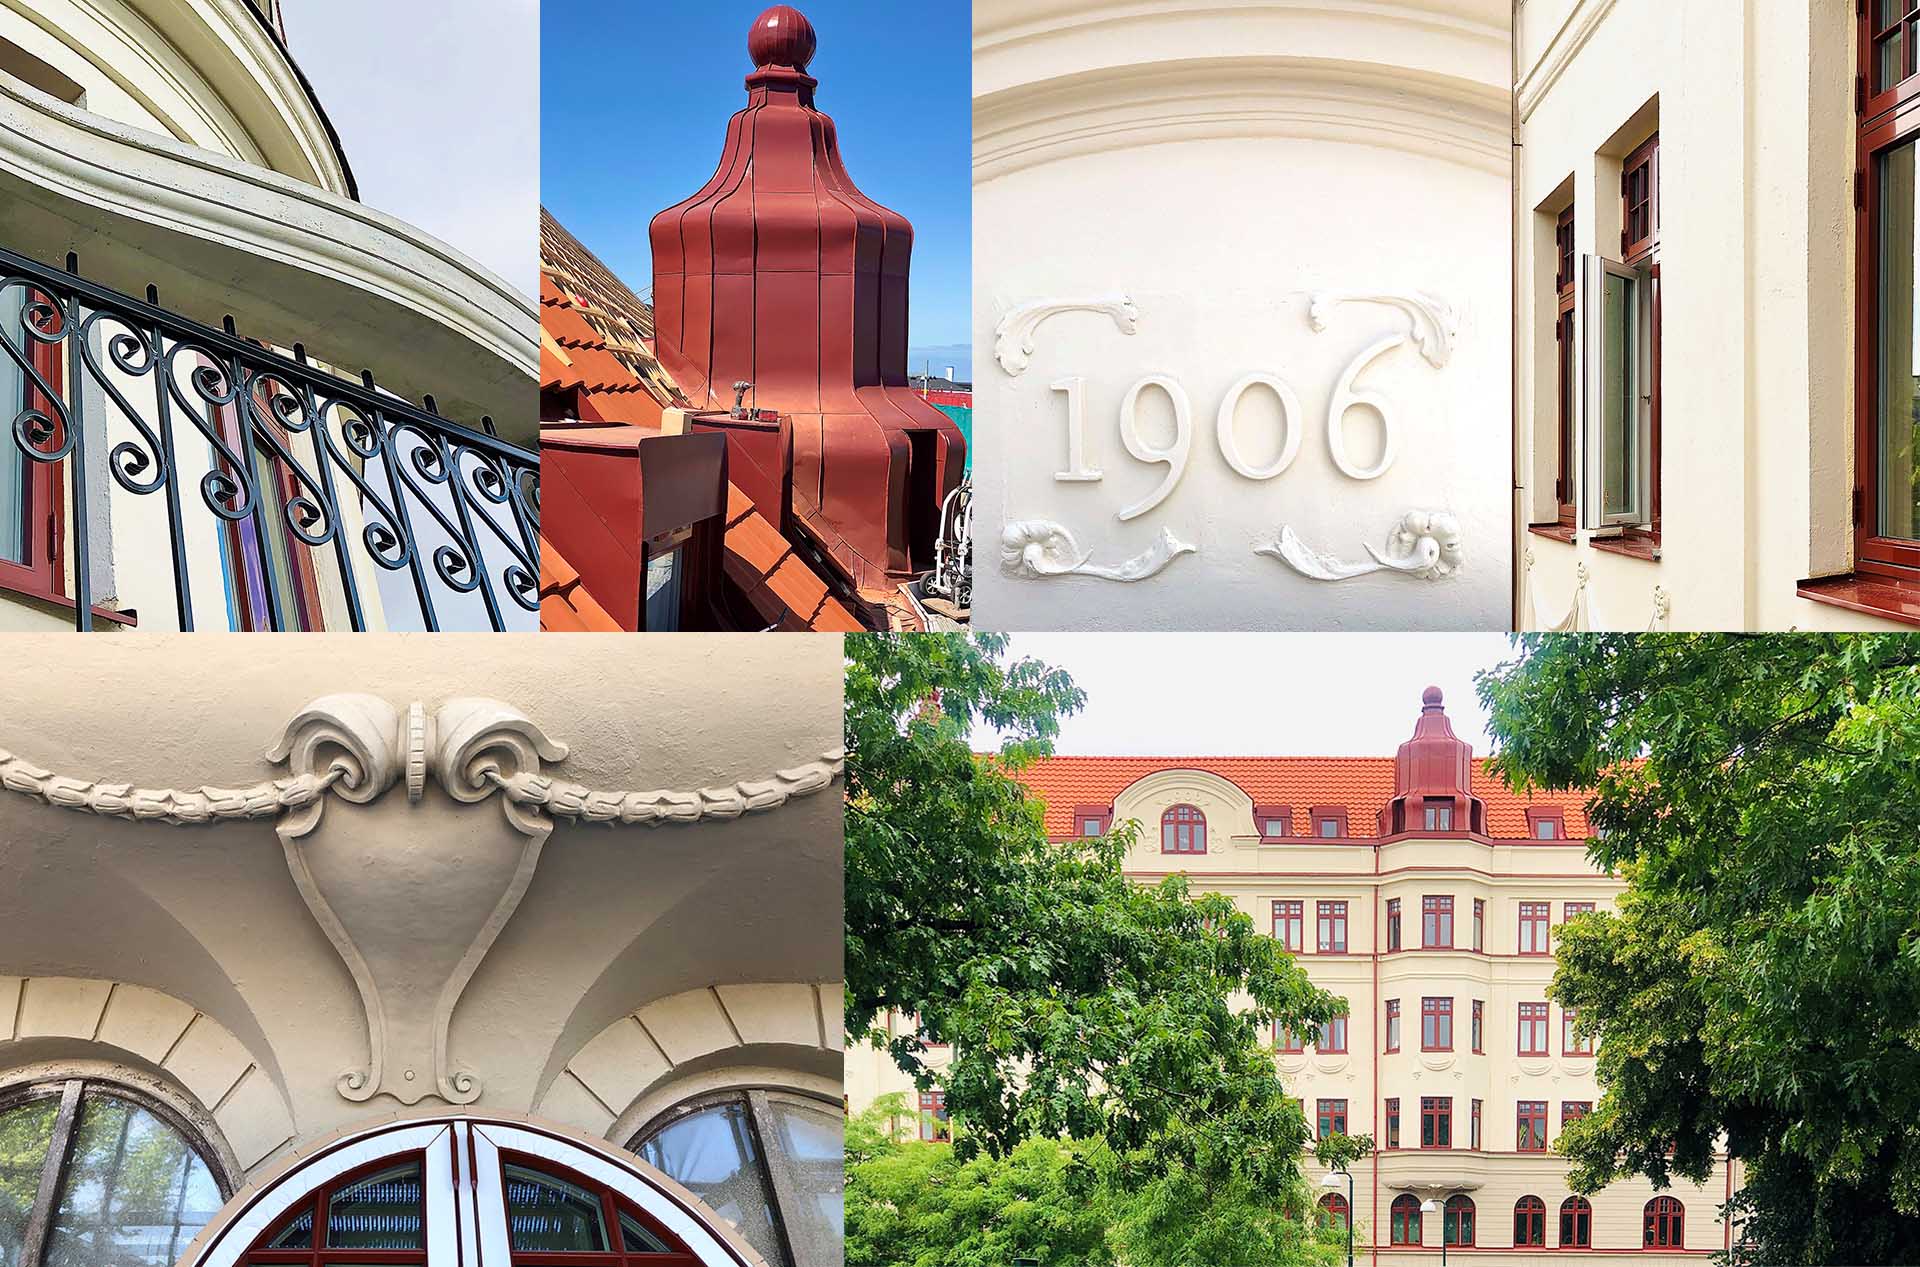 A collage of several details of buildnings with an old-fashioned charm